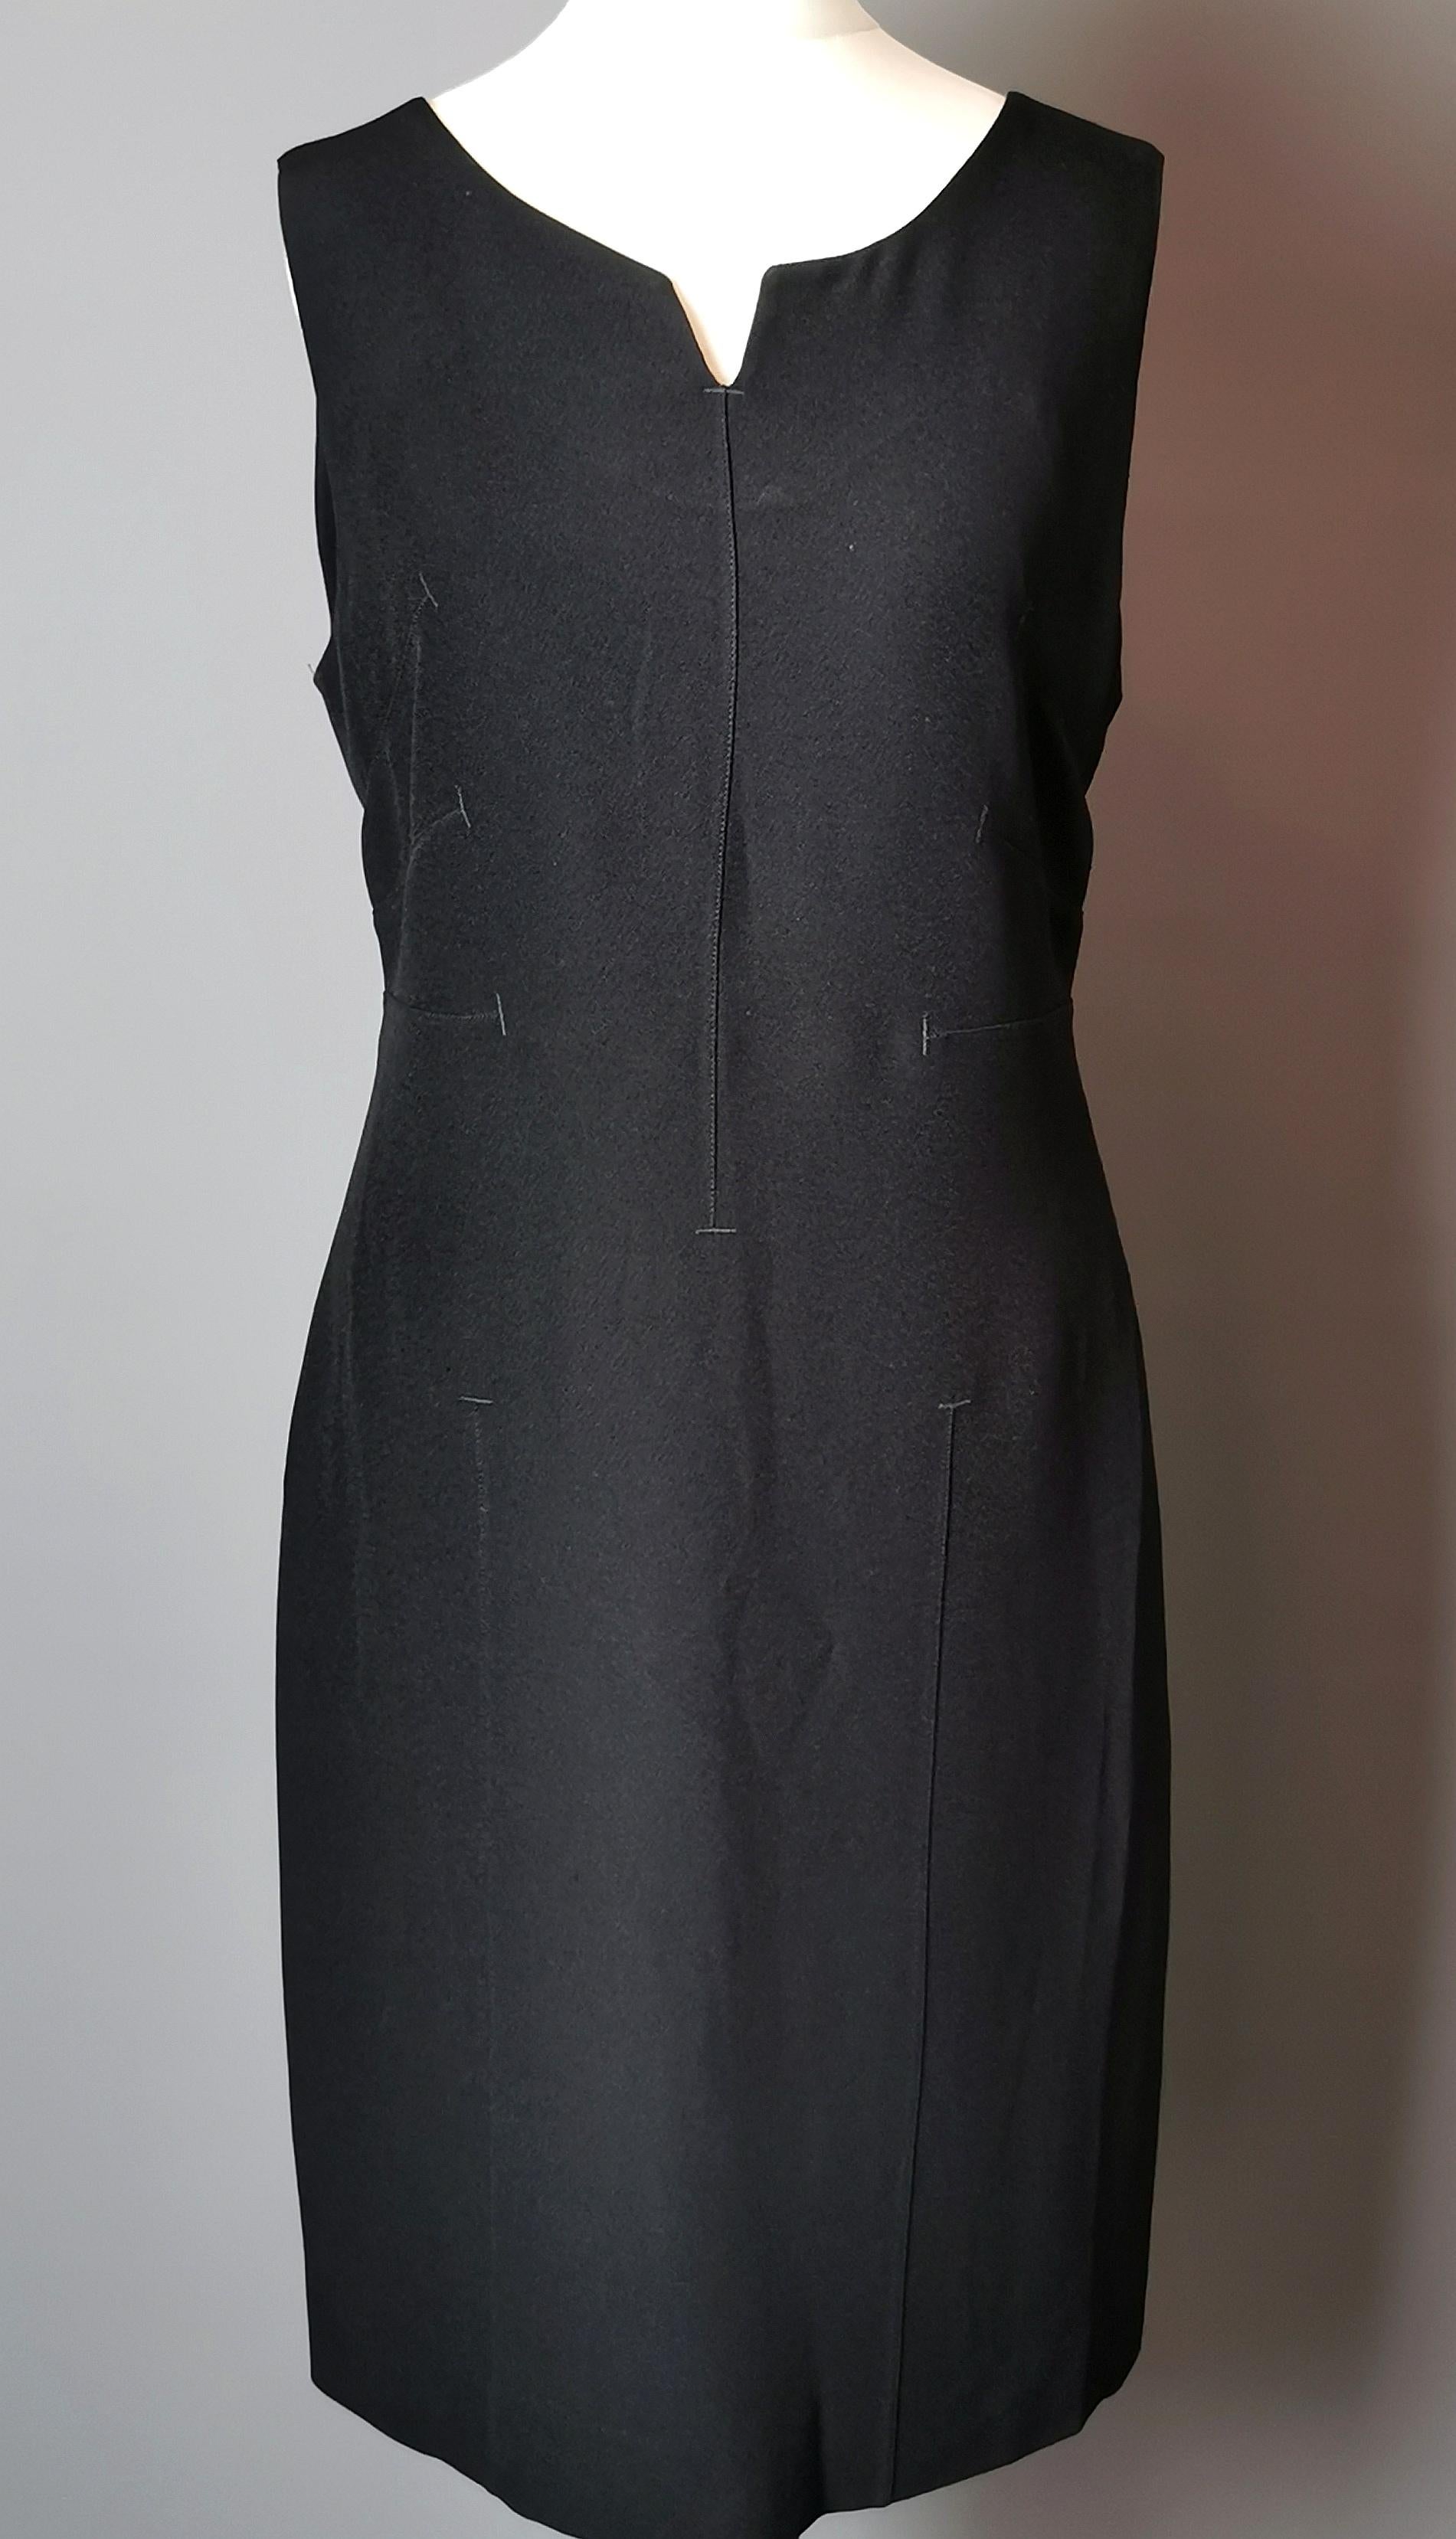 Moschino Cheap and Chic black sheath dress For Sale 4